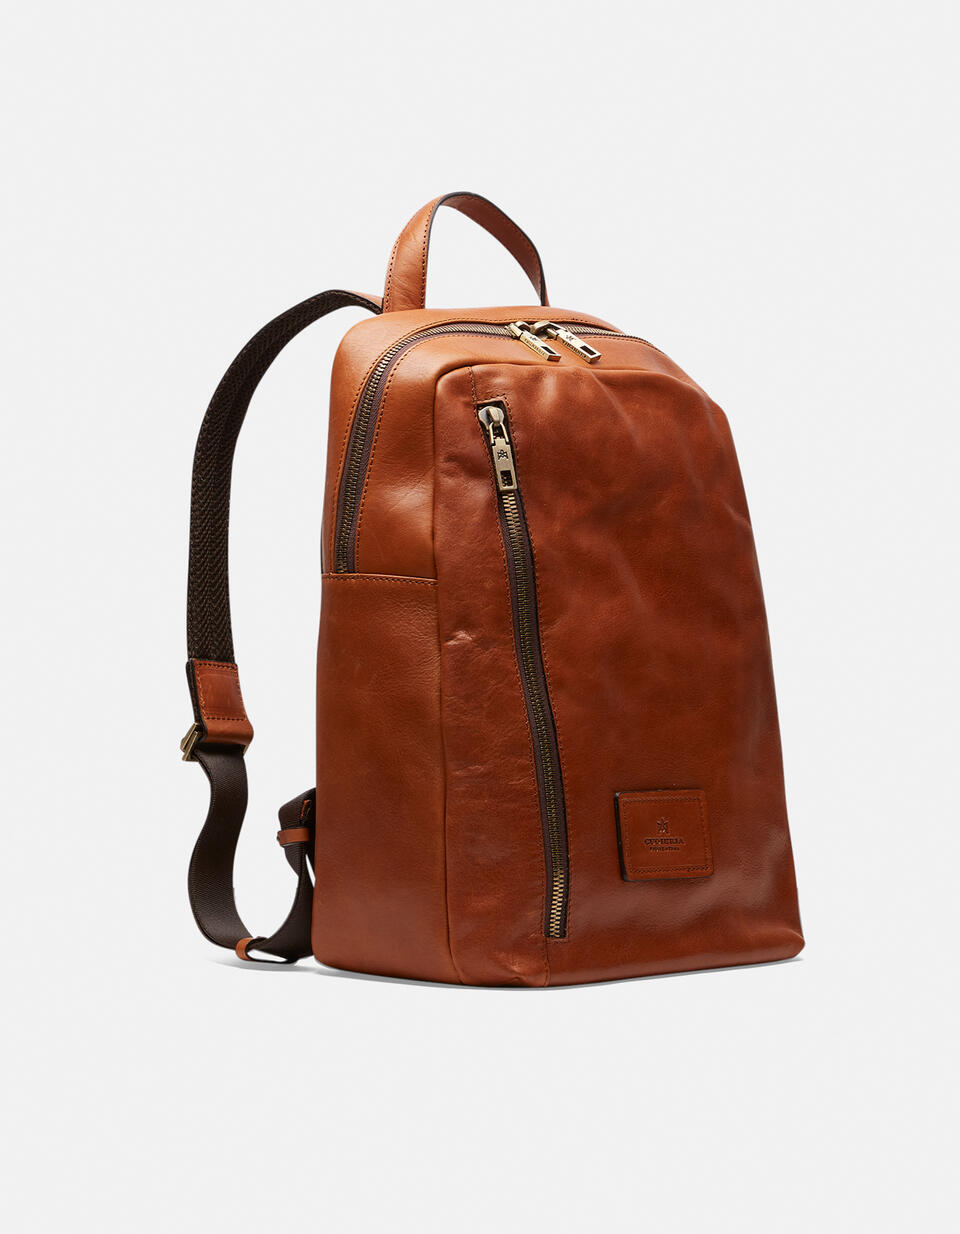 Backpack  - Backpacks & Toiletry Bag - Travel Bags - Cuoieria Fiorentina